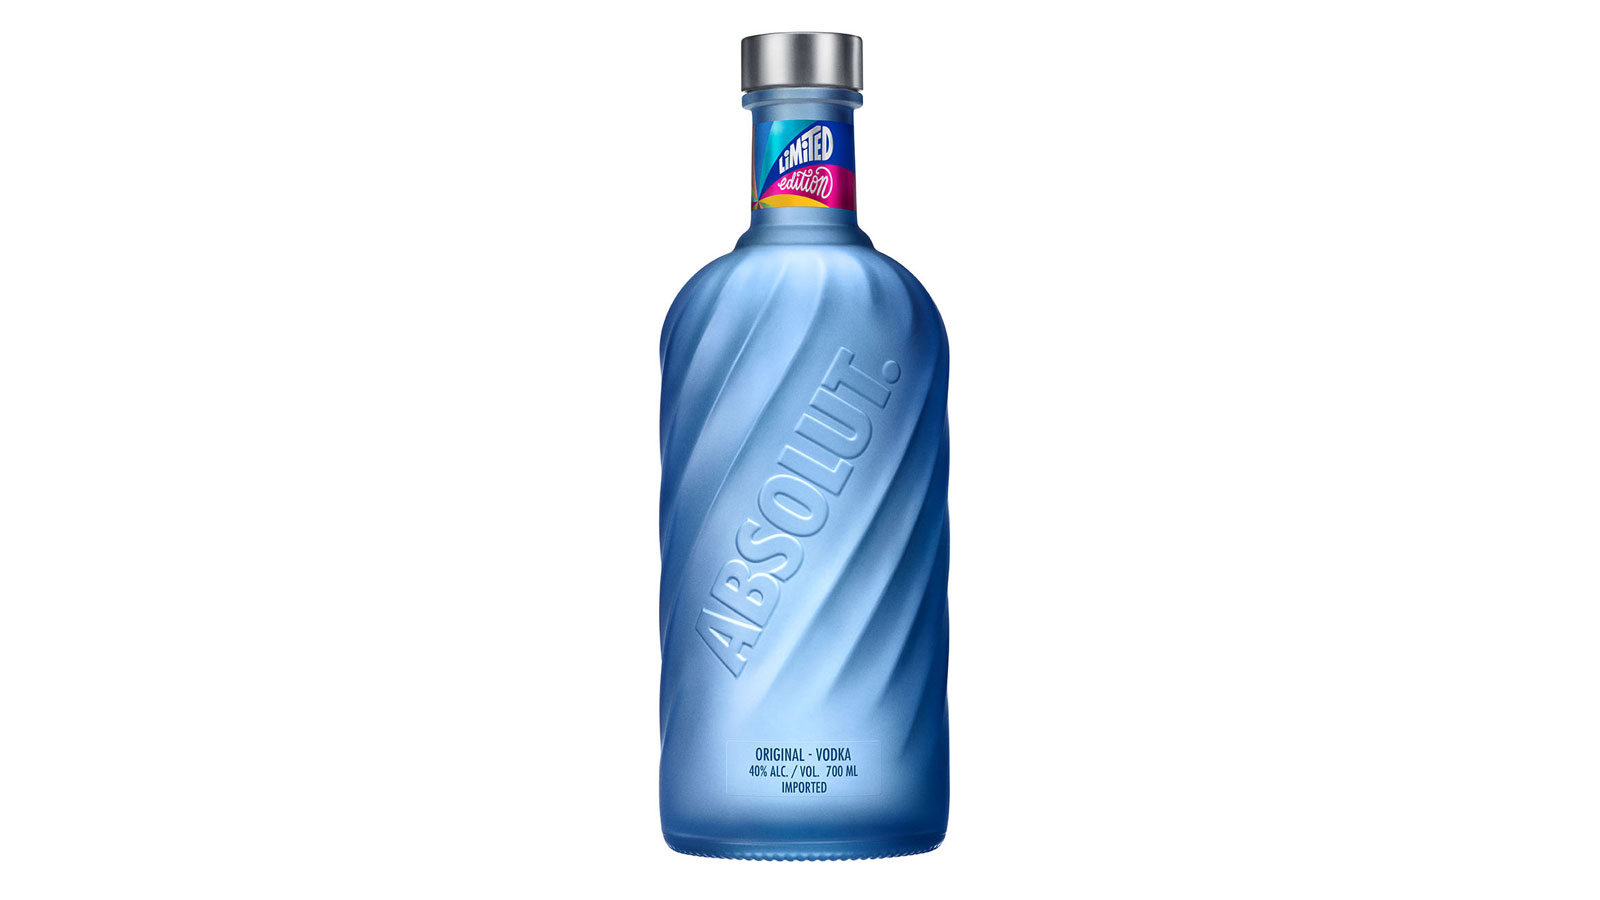 Absolut celebrates the power of togetherness and inclusivity with a new limited-edition bottle, Abso